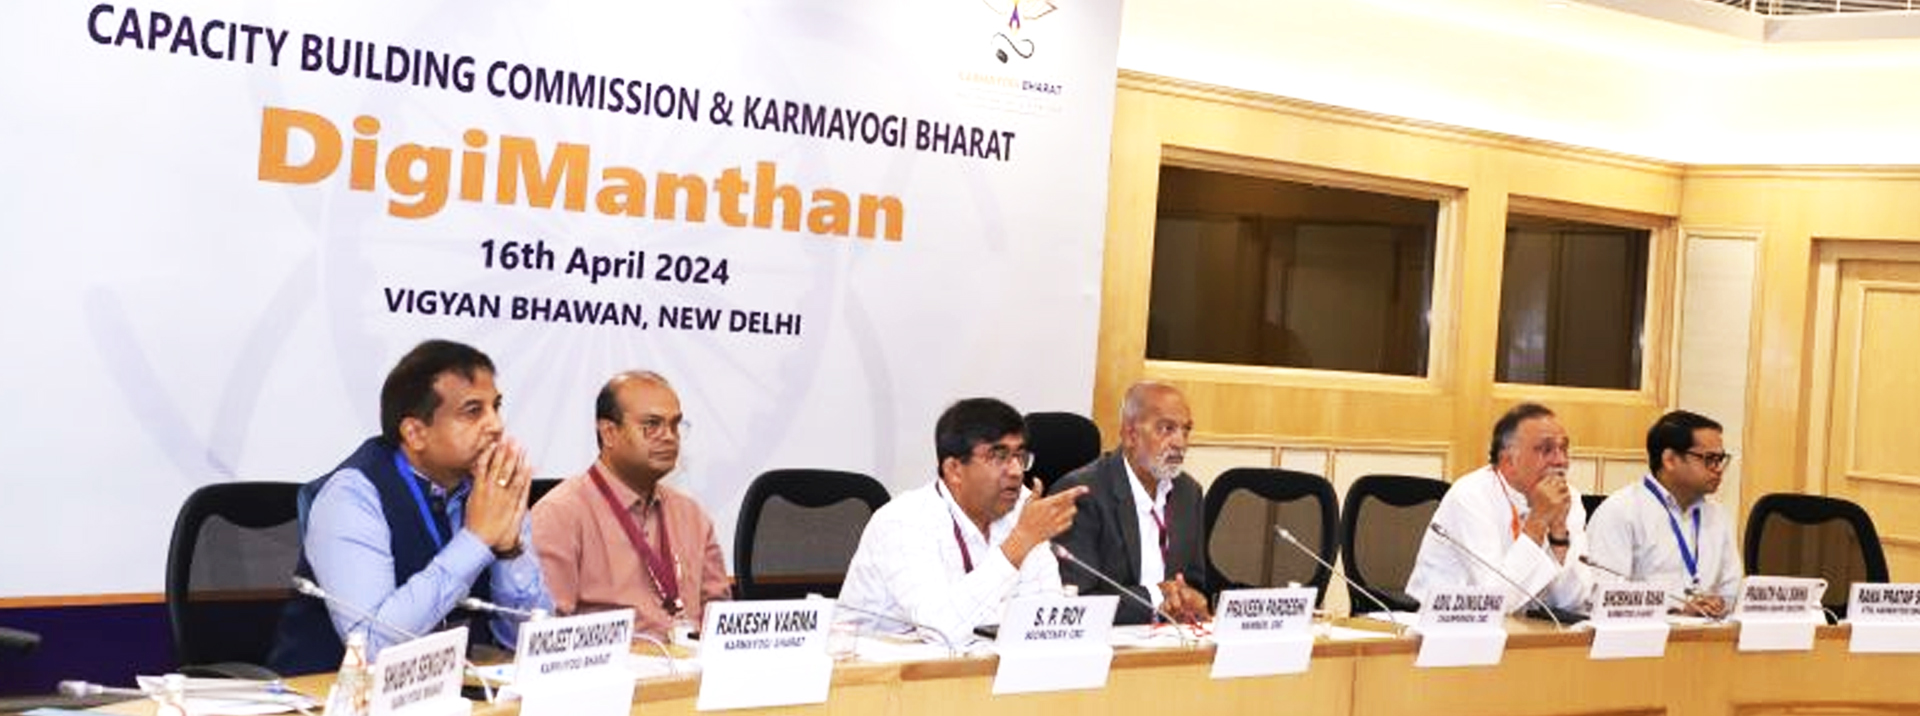 Capacity Building Commission and Karmayogi Bharat jointly hosted ‘DigiManthan’ at Vigyan Bhawan.